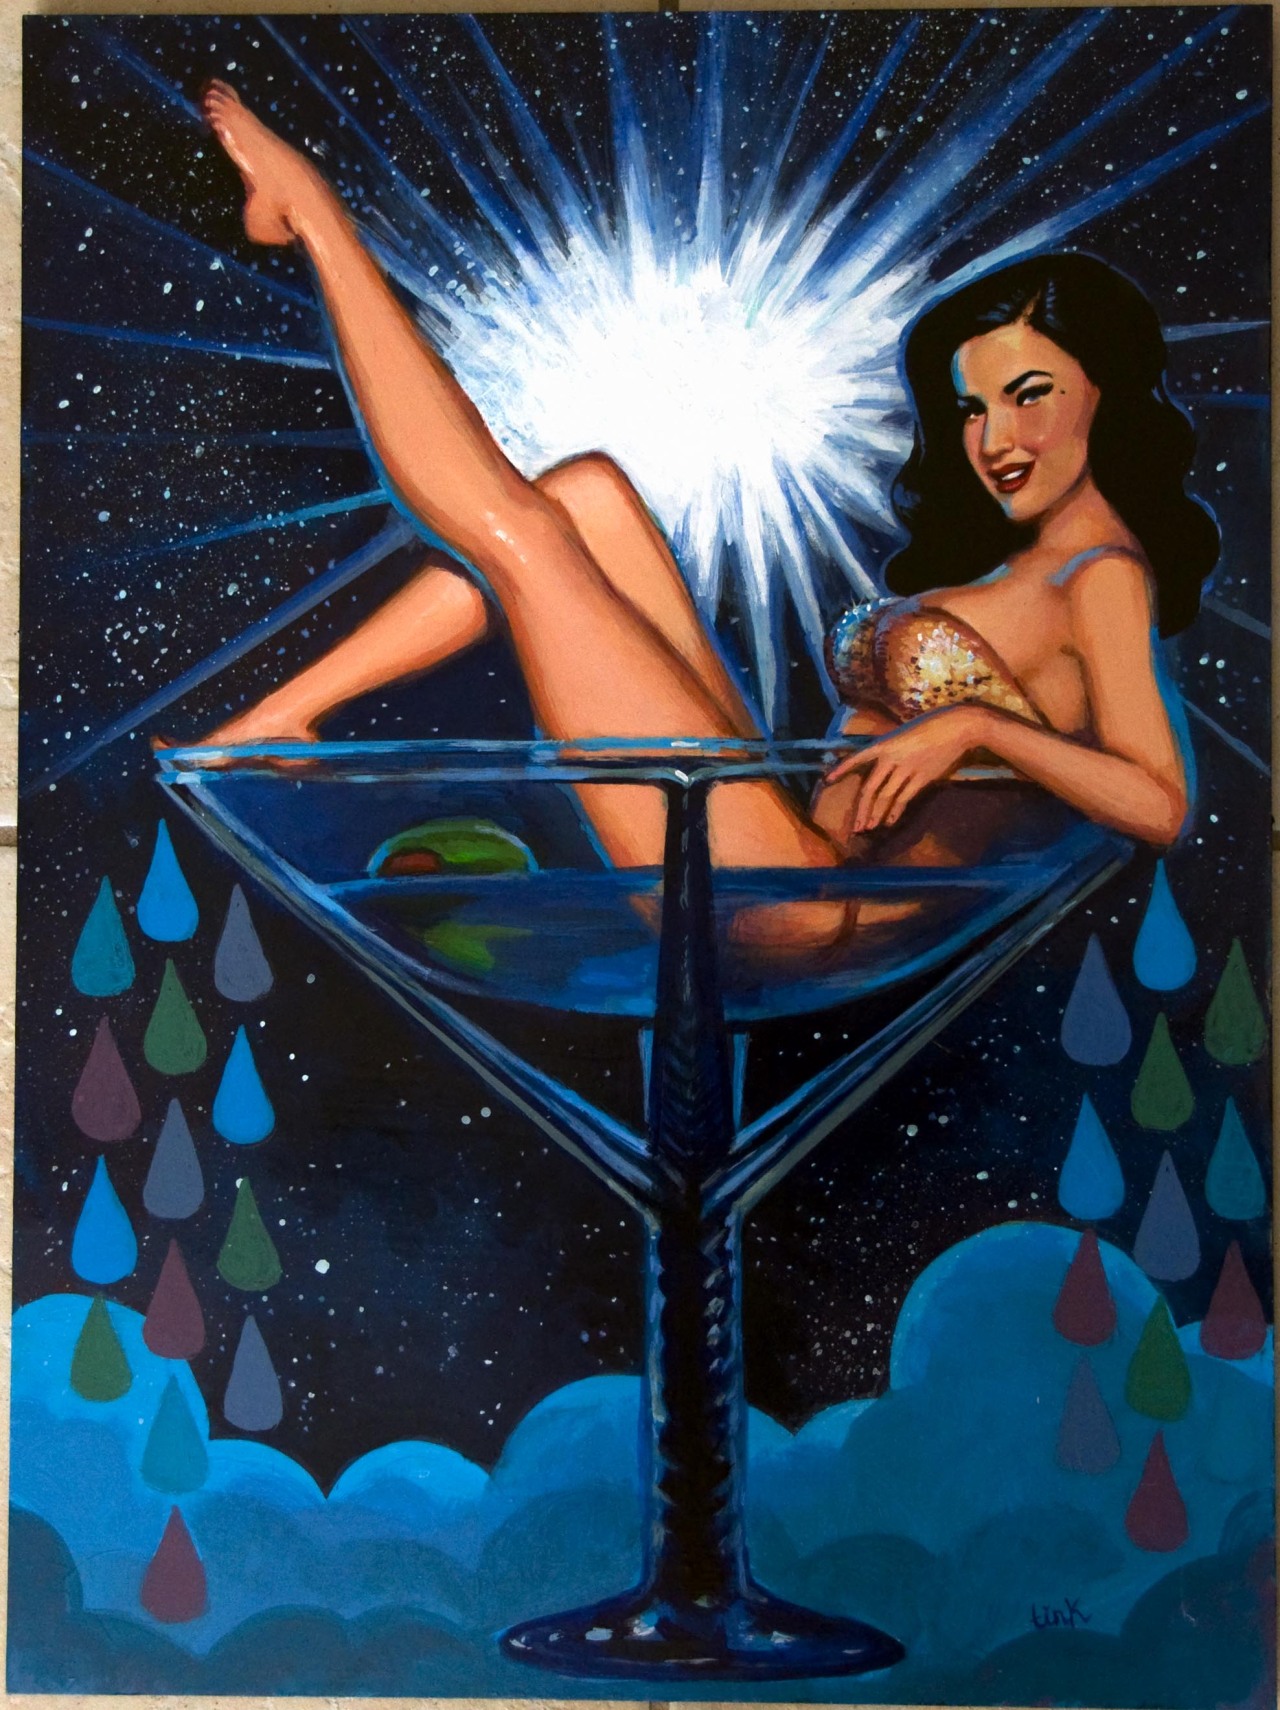 Dita-Tini - Burlesque Fan Art by Jessica Whiteside Cooper - mixed media painting on wood